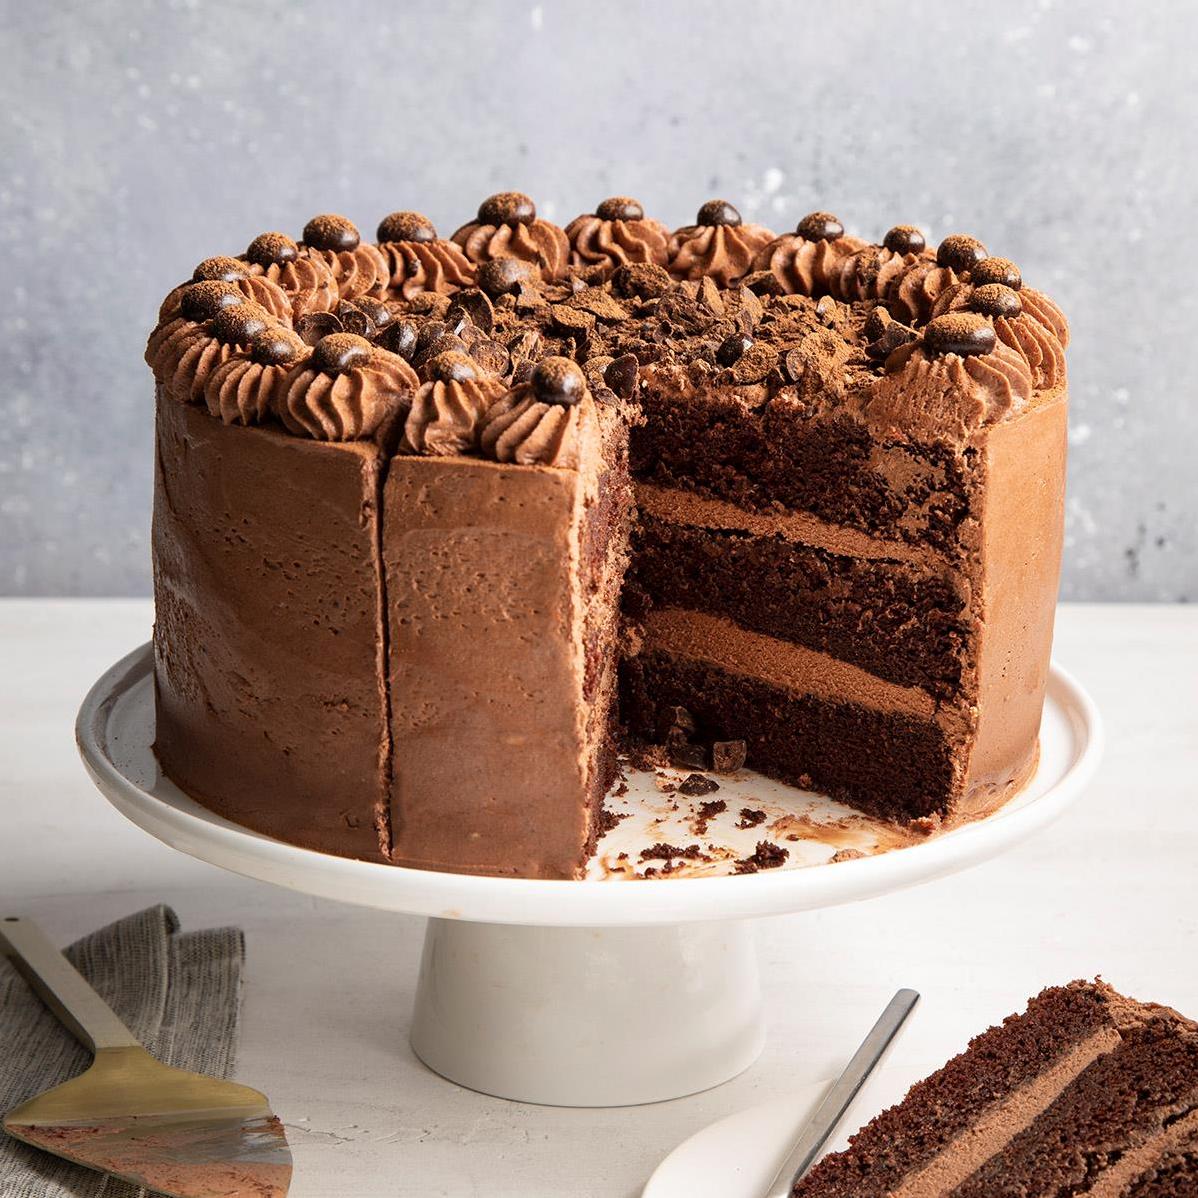 Indulge in Decadence with our Chocolate Mocha Cake